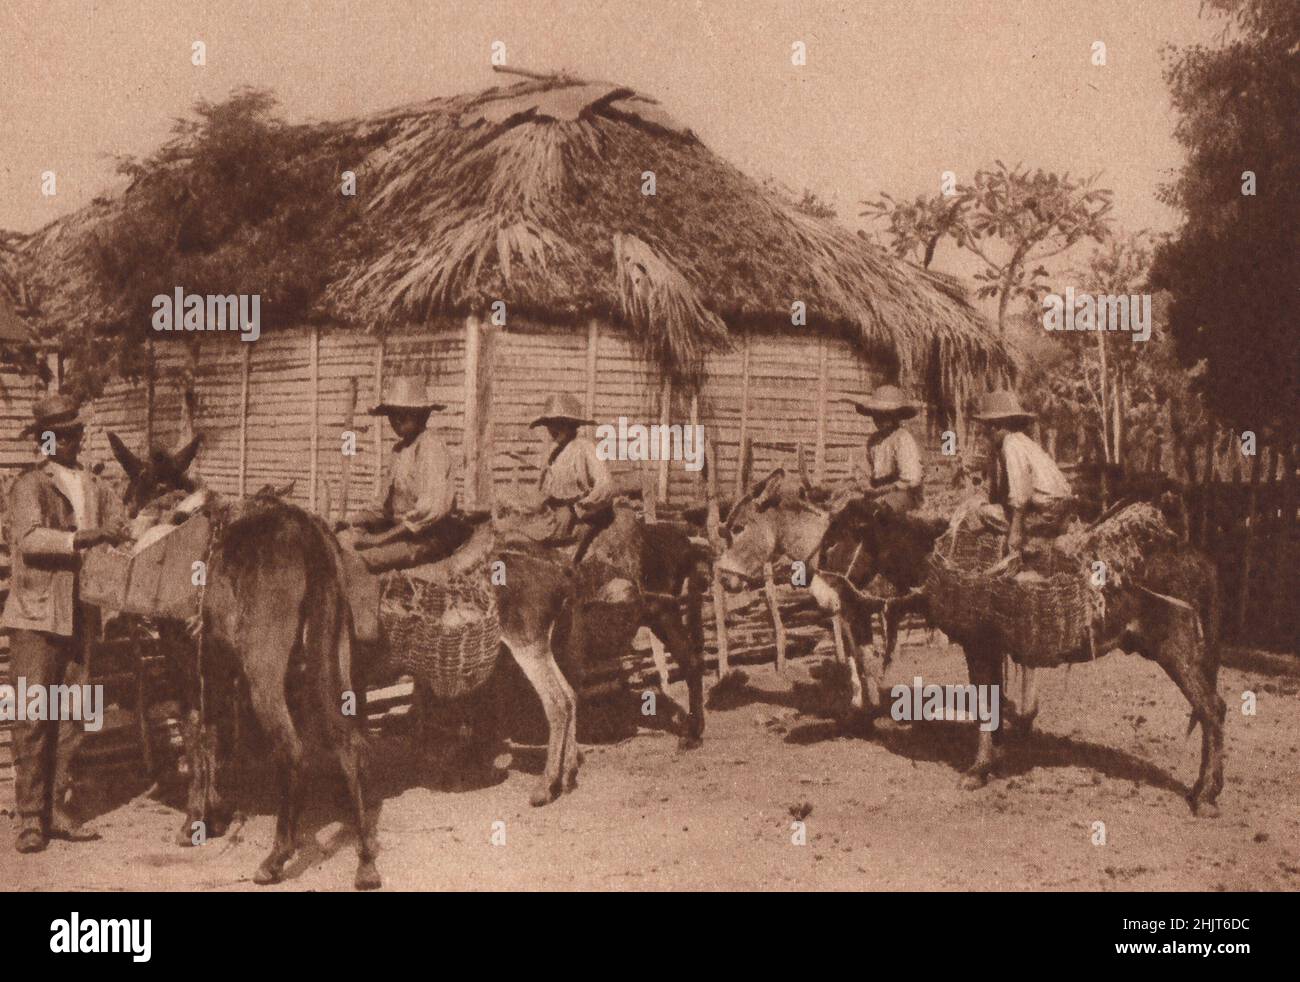 Two-thirds of the island of Haiti are the republic of Santo Domingo. These Dominican farm lads are preparing for market. West Indies (1923) Stock Photo